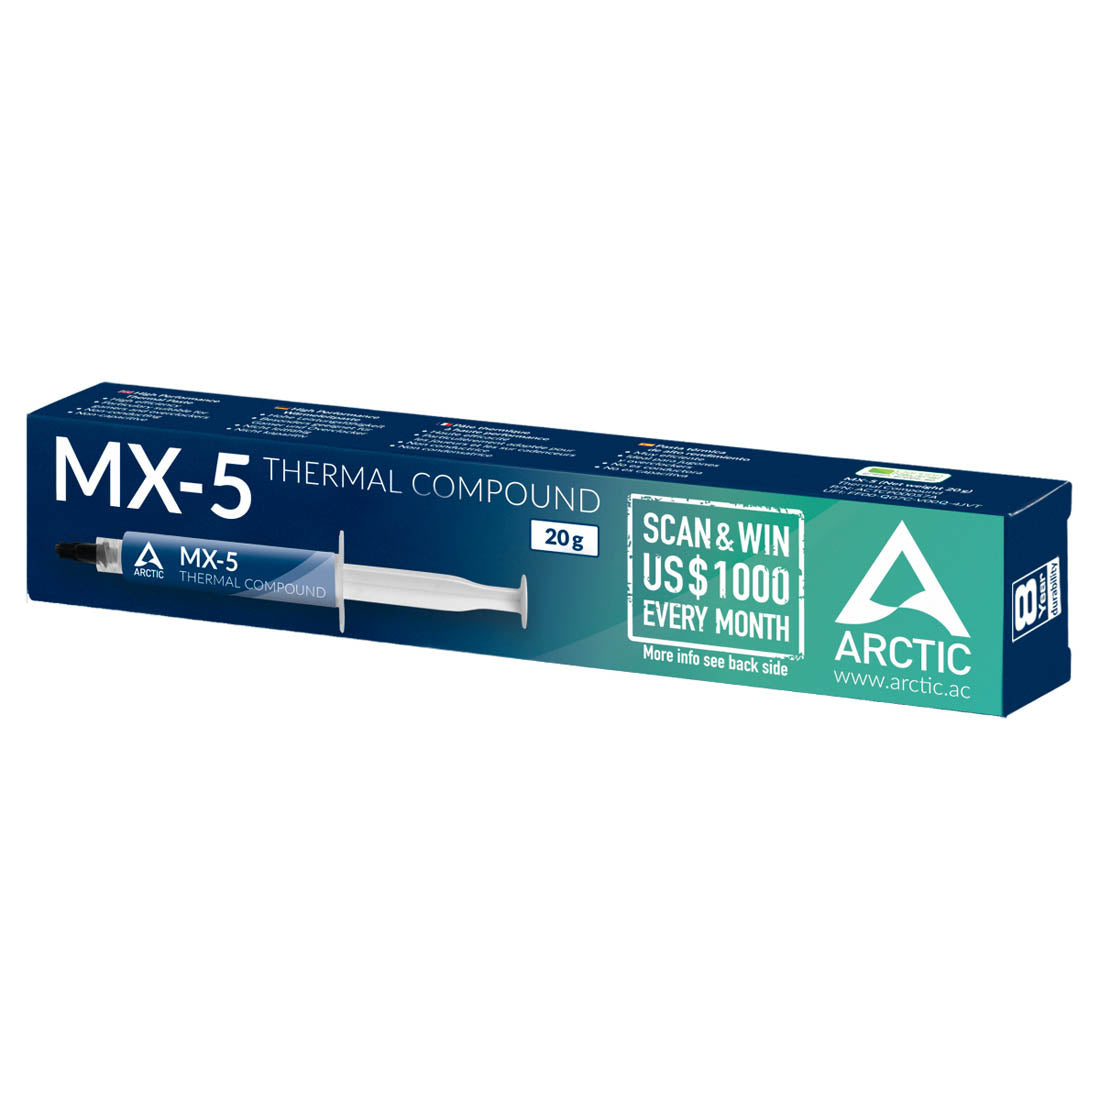 ARCTIC MX-5 20gm Carbon Based Thermal Paste